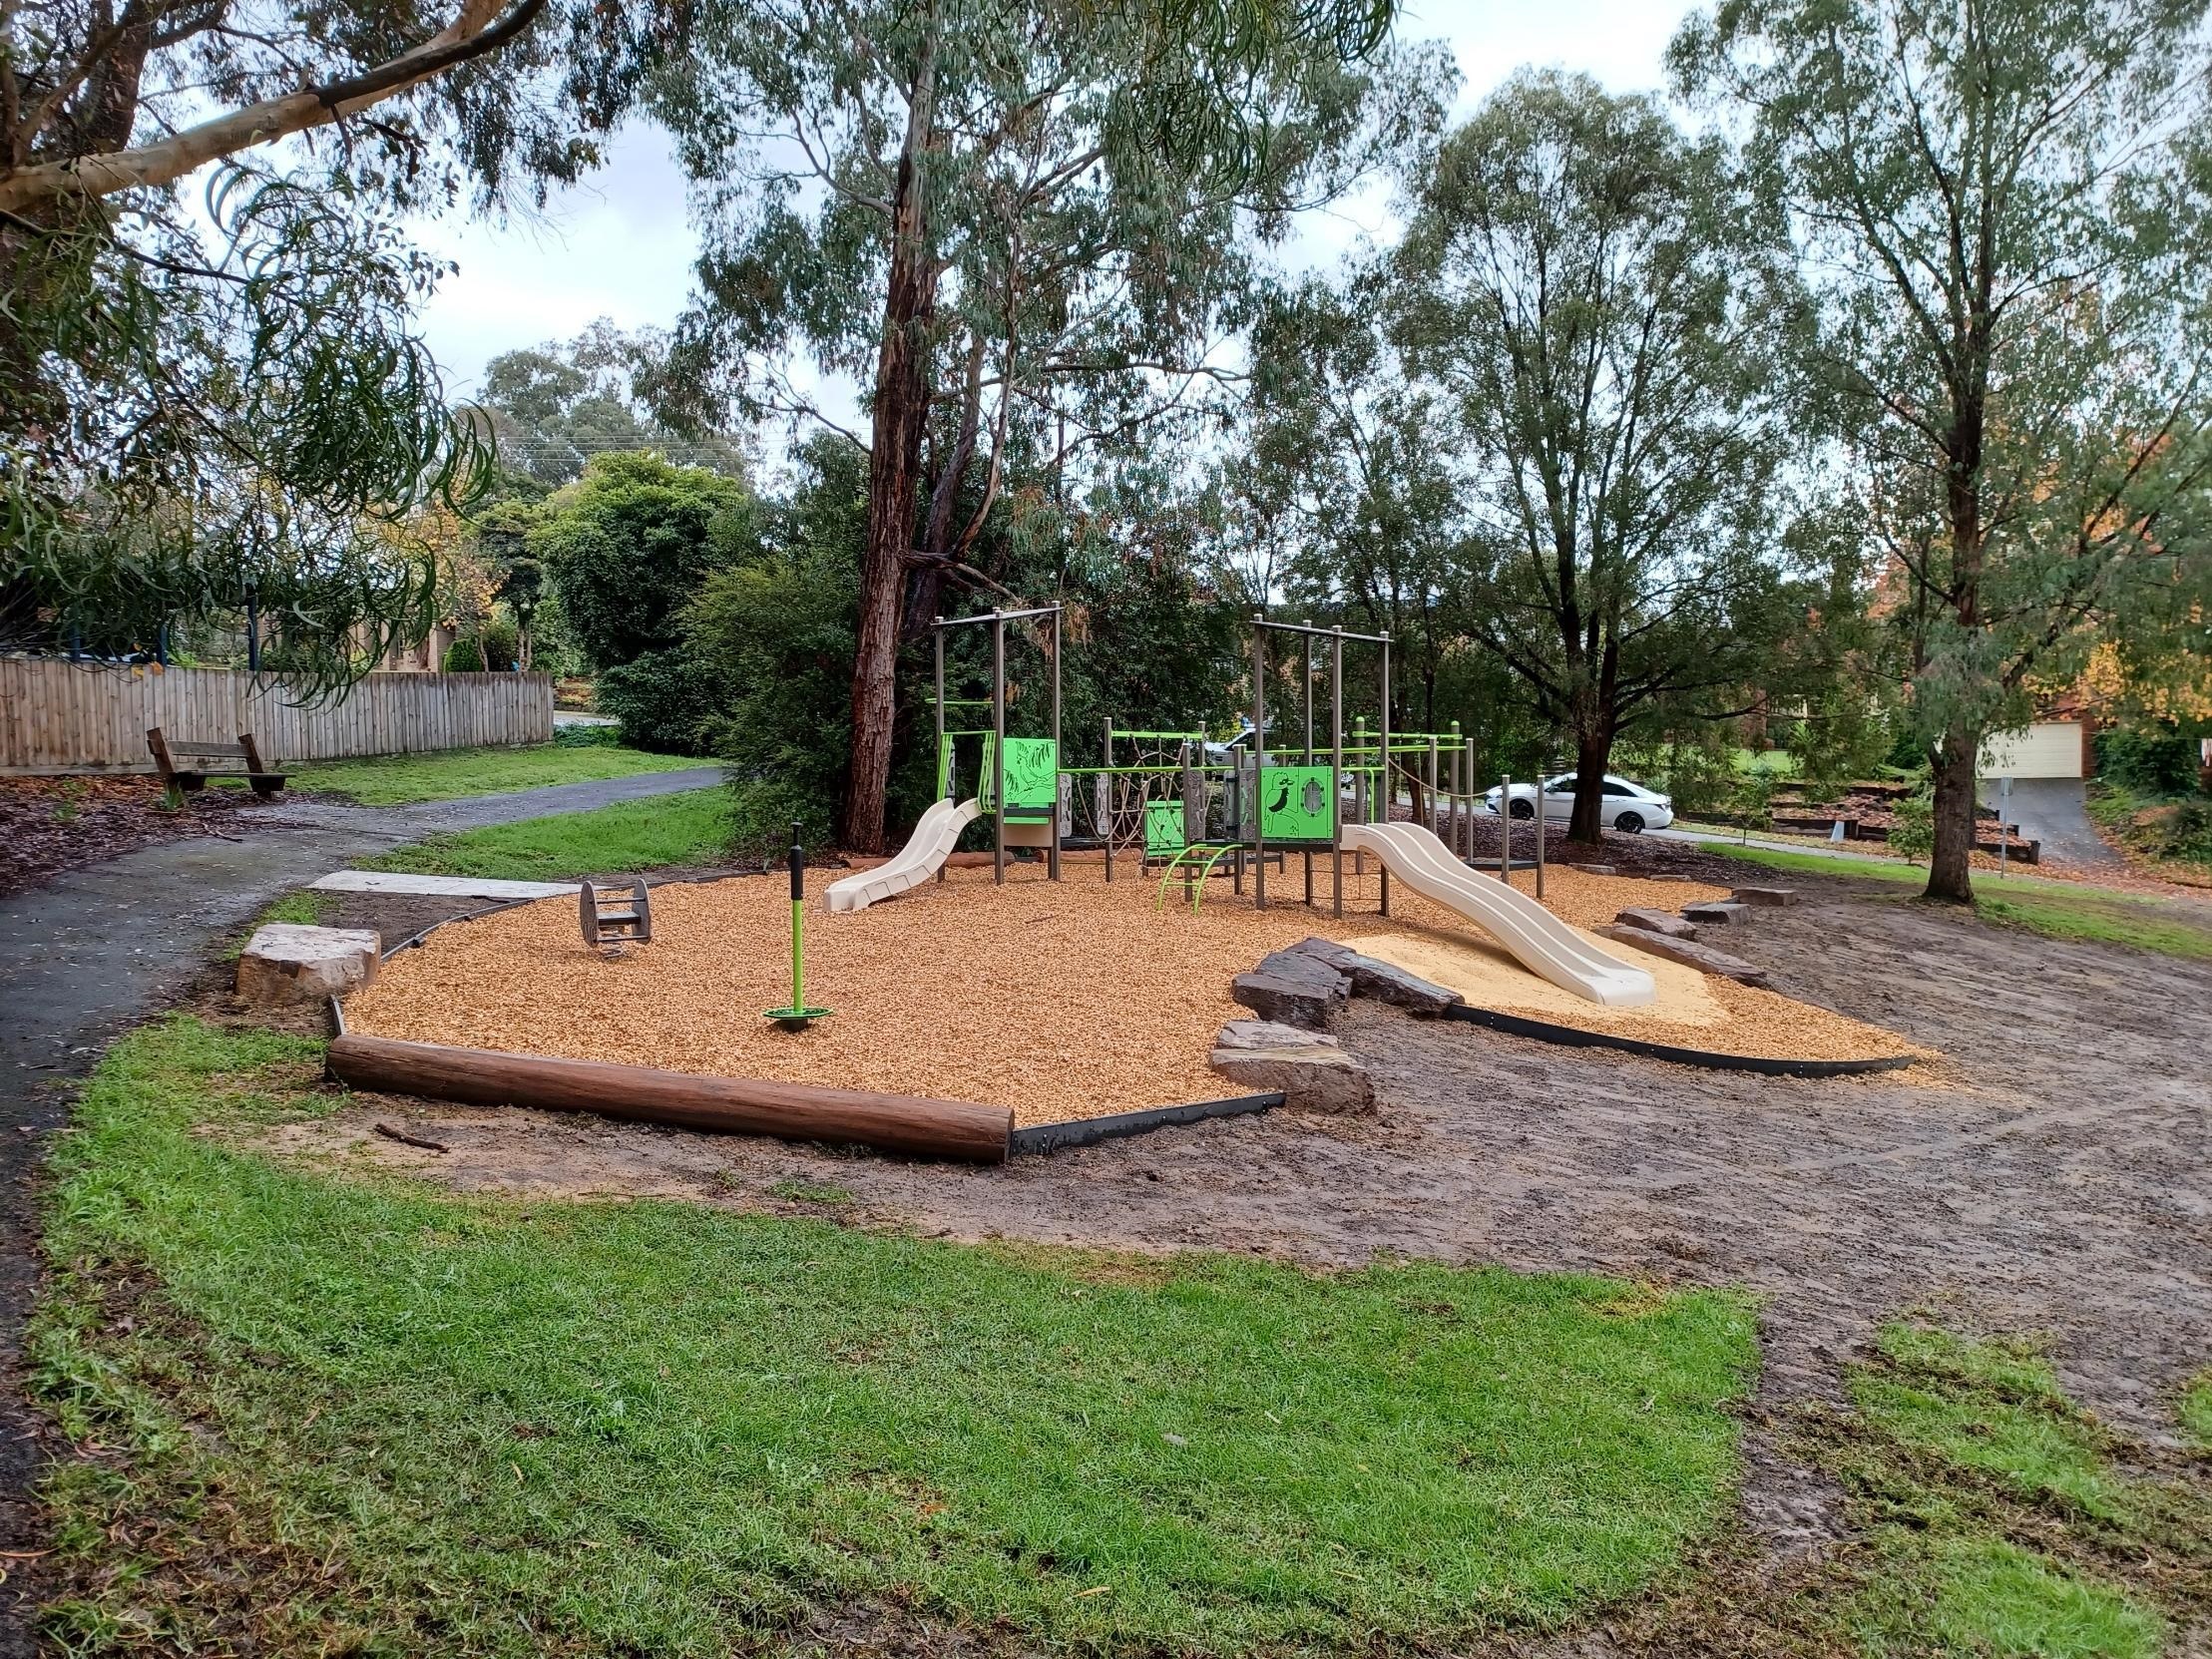 The new San Martin playspace includes swings, play equipment and slides